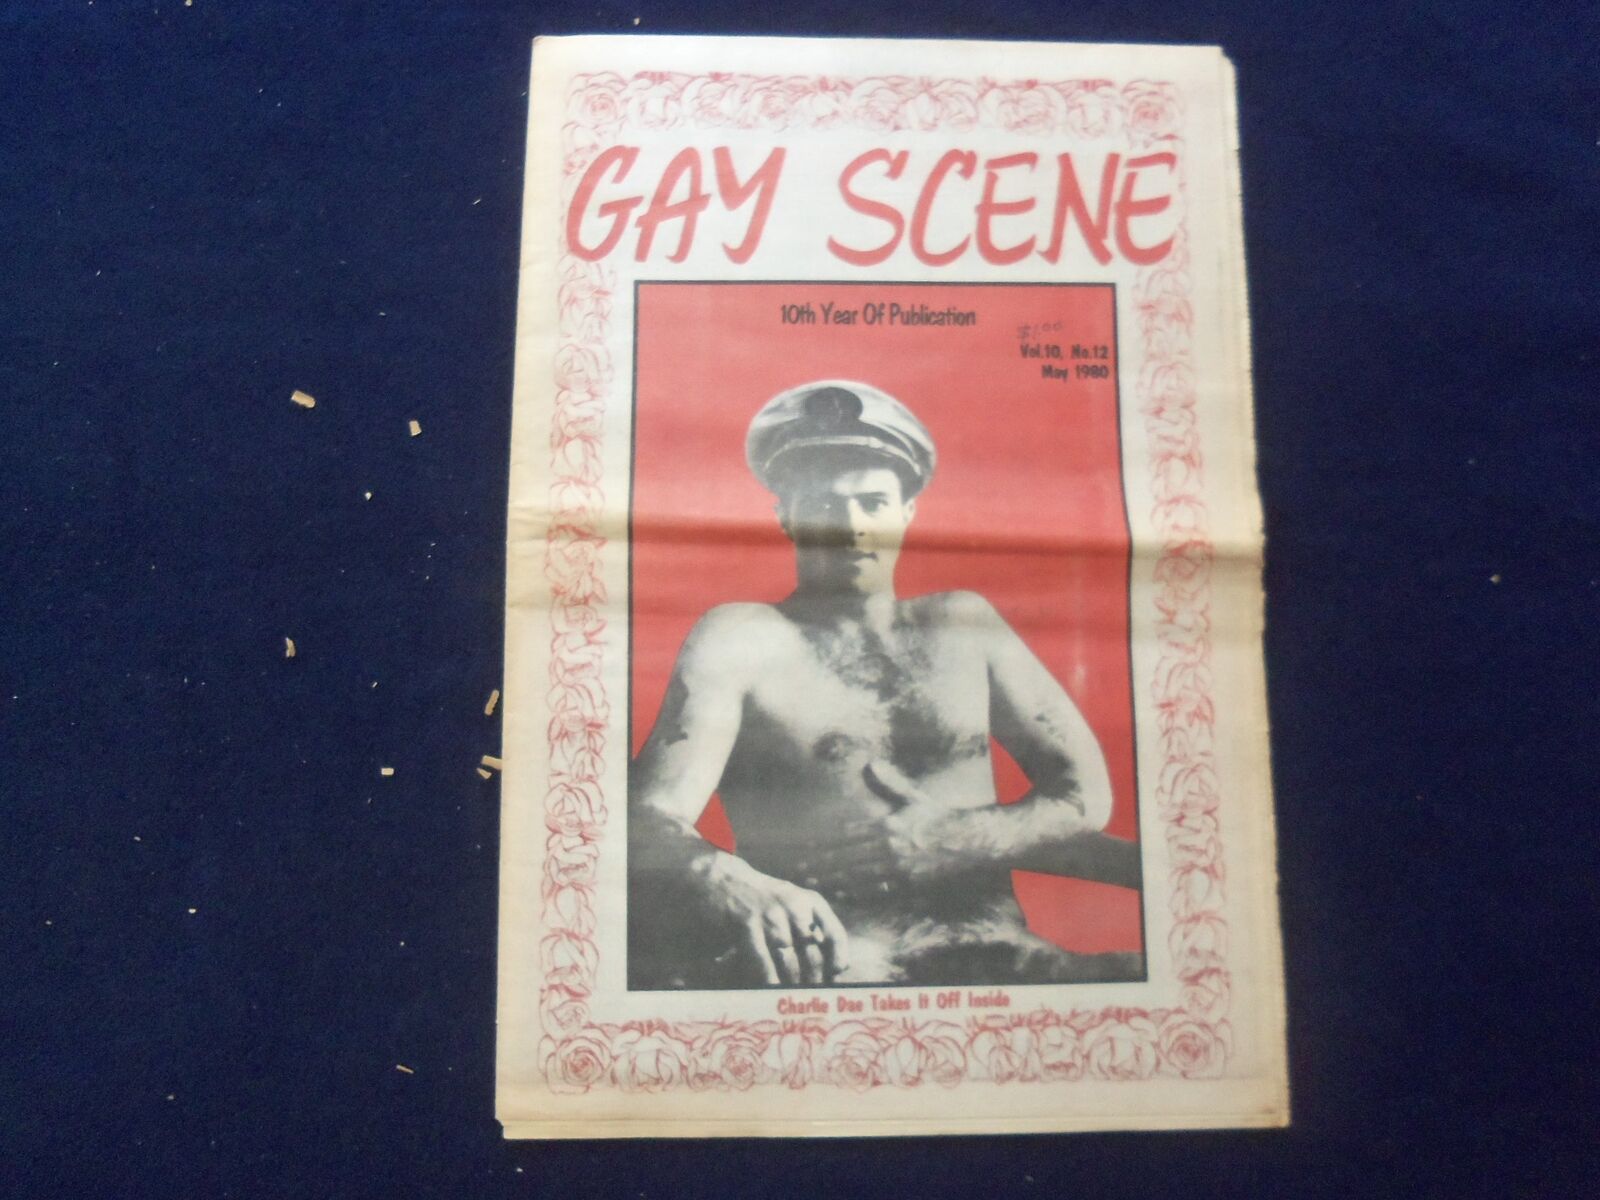 1980 MAY GAY SCENE NEWSPAPER - CHARLIE DAE TAKES IT OFF INSIDE - NP 6798